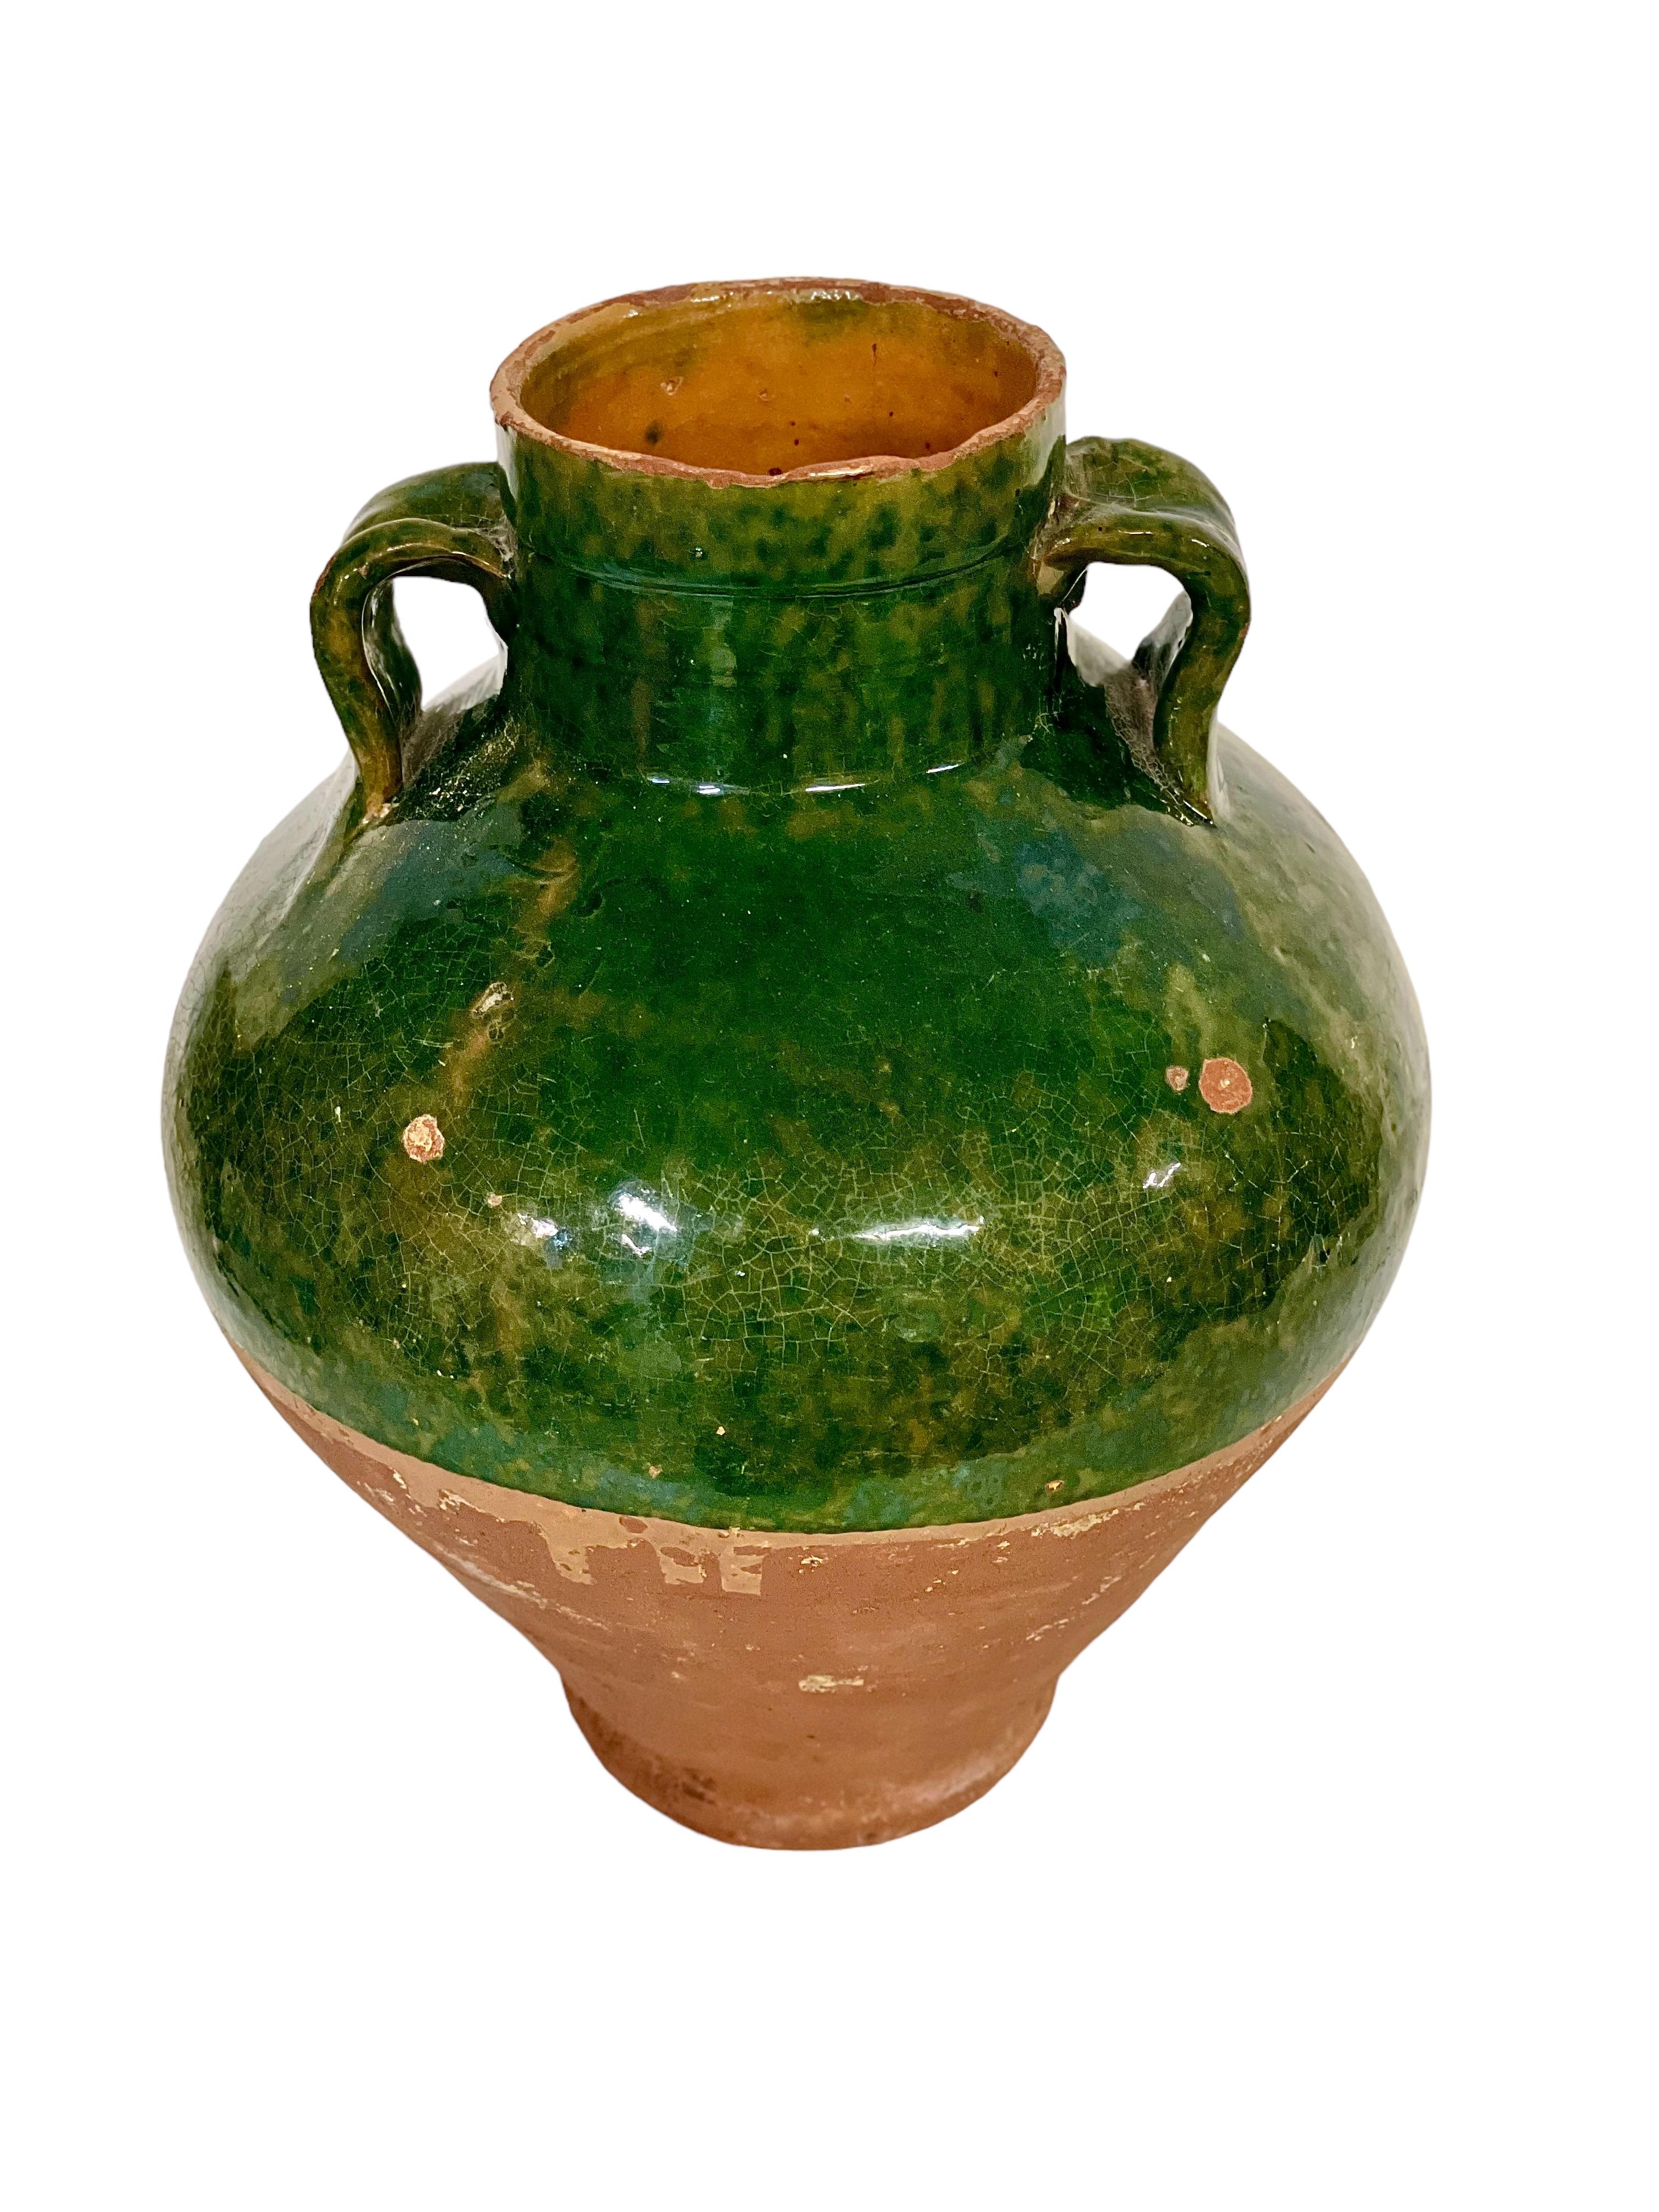 This superb 19th century antique French terracotta pot, half-glazed in vibrant emerald green, began its life as a utilitarian household vessel for the preservation and storage of olive oil. Fully glazed inside, only the upper half of the exterior is